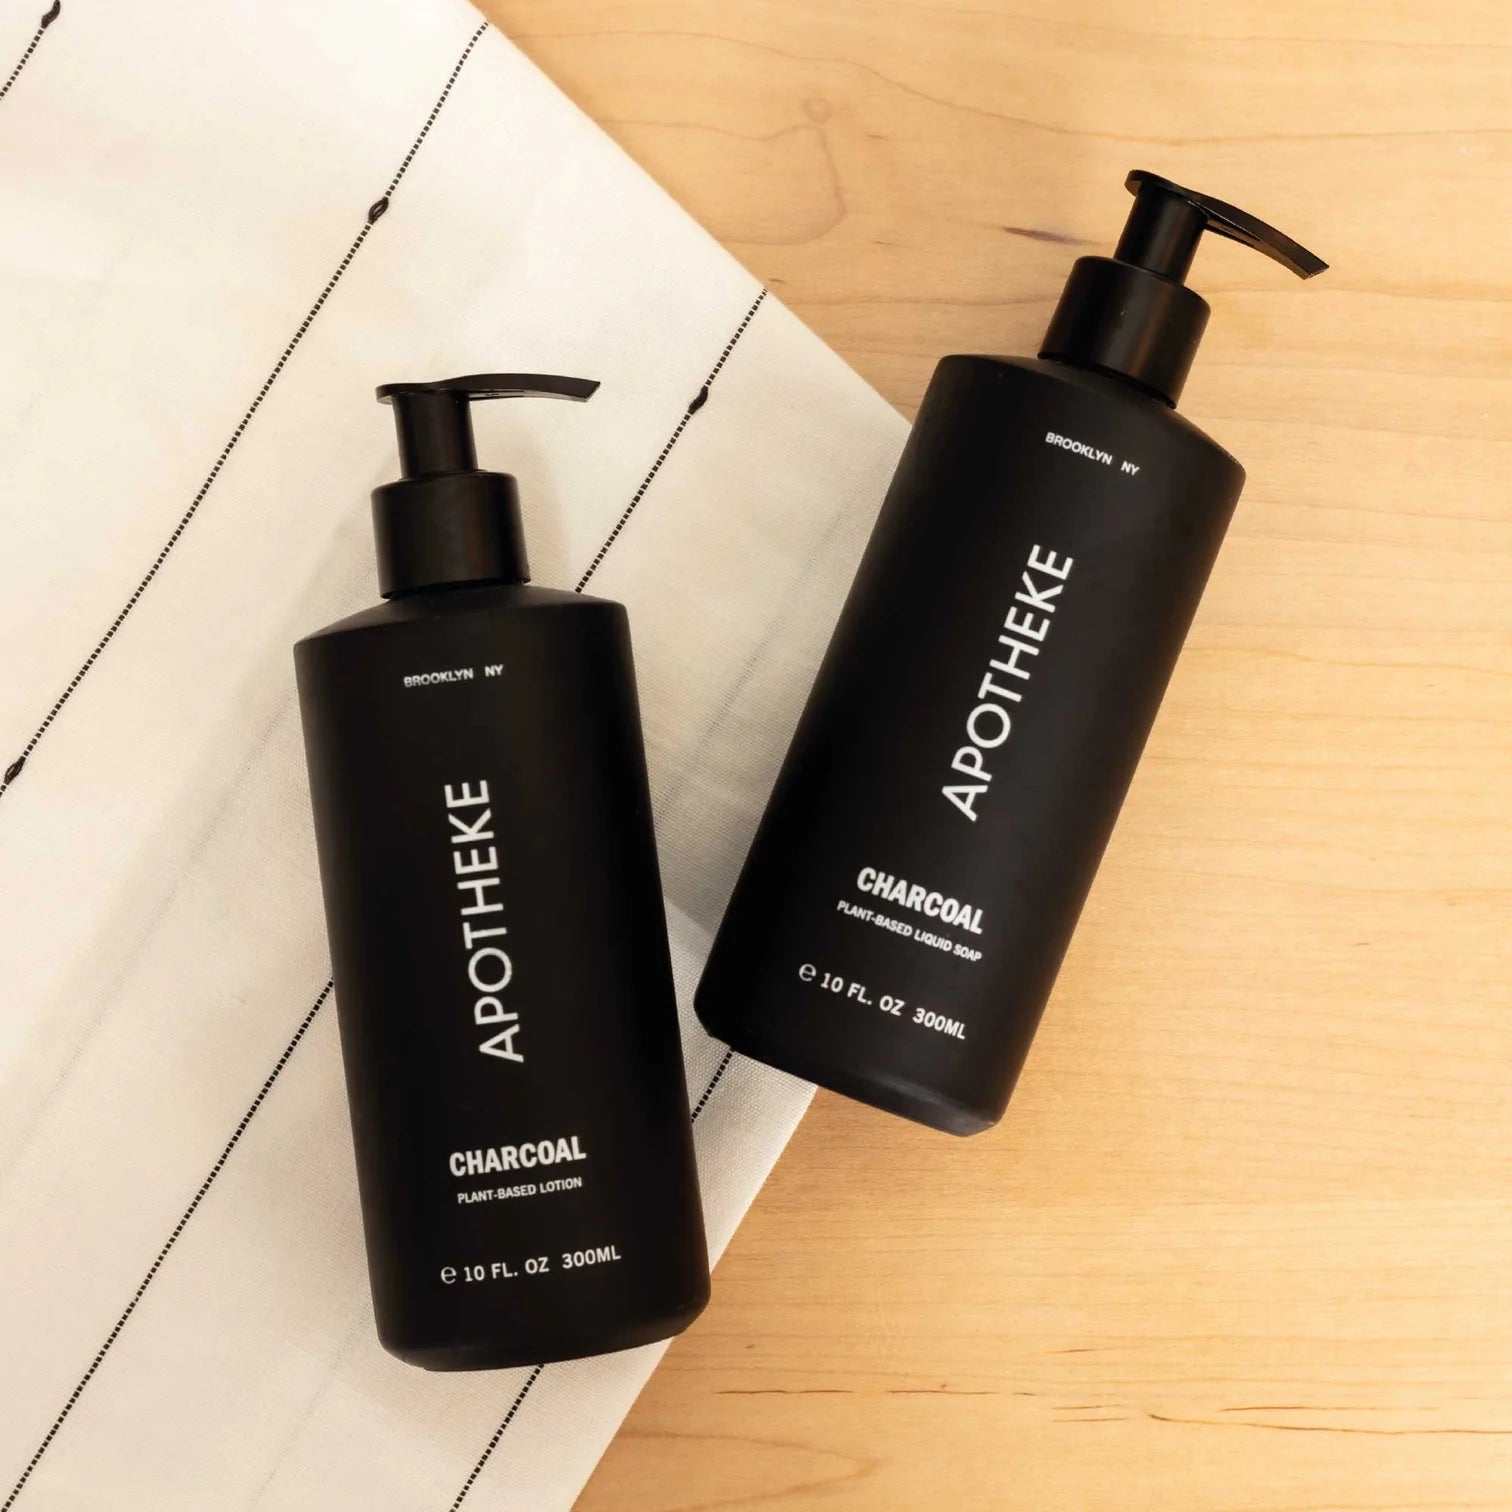 Apotheke Hand and Body Lotion, Charcoal